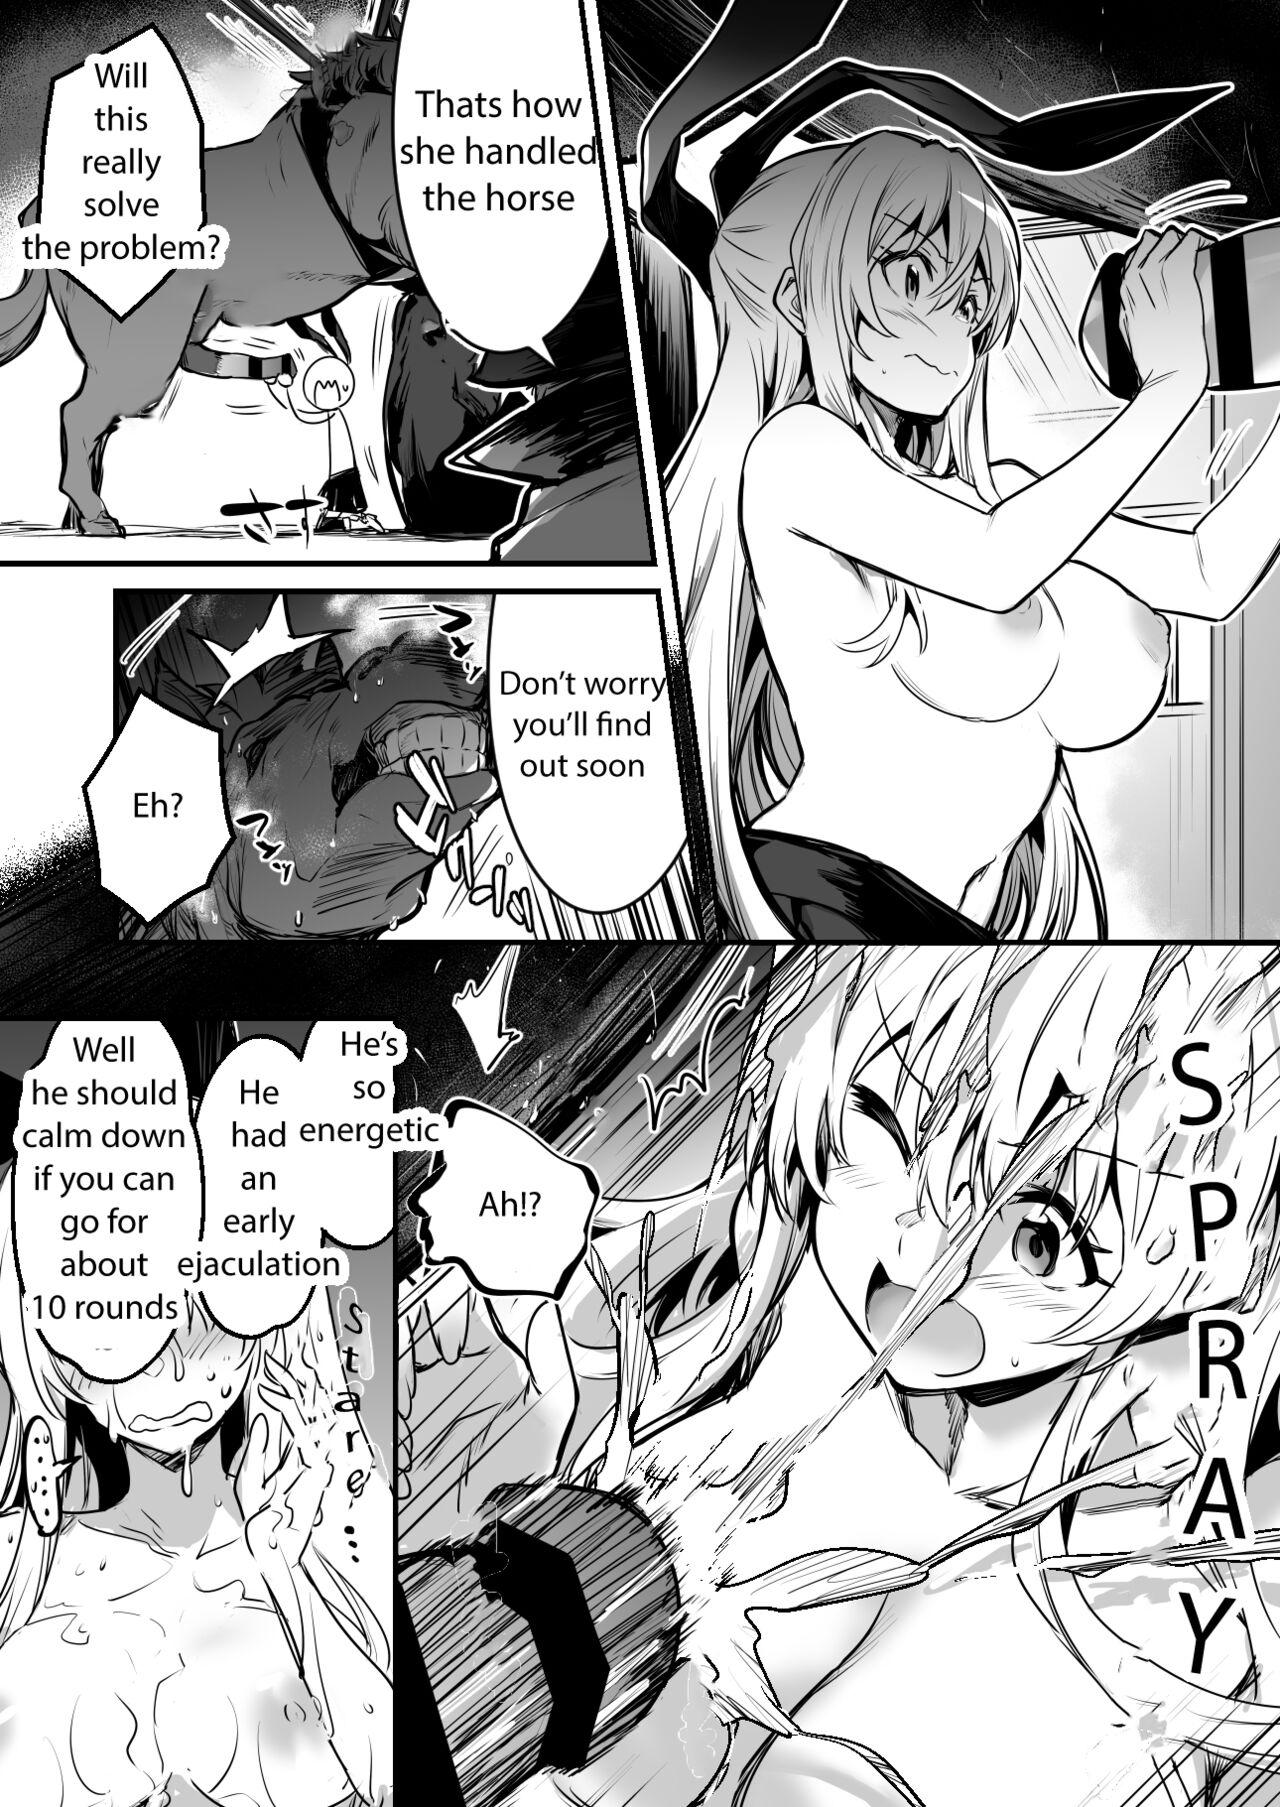 Cunt Adventure-chan helps the lustful horse cum so he'll carry her away 18 Porn - Page 3